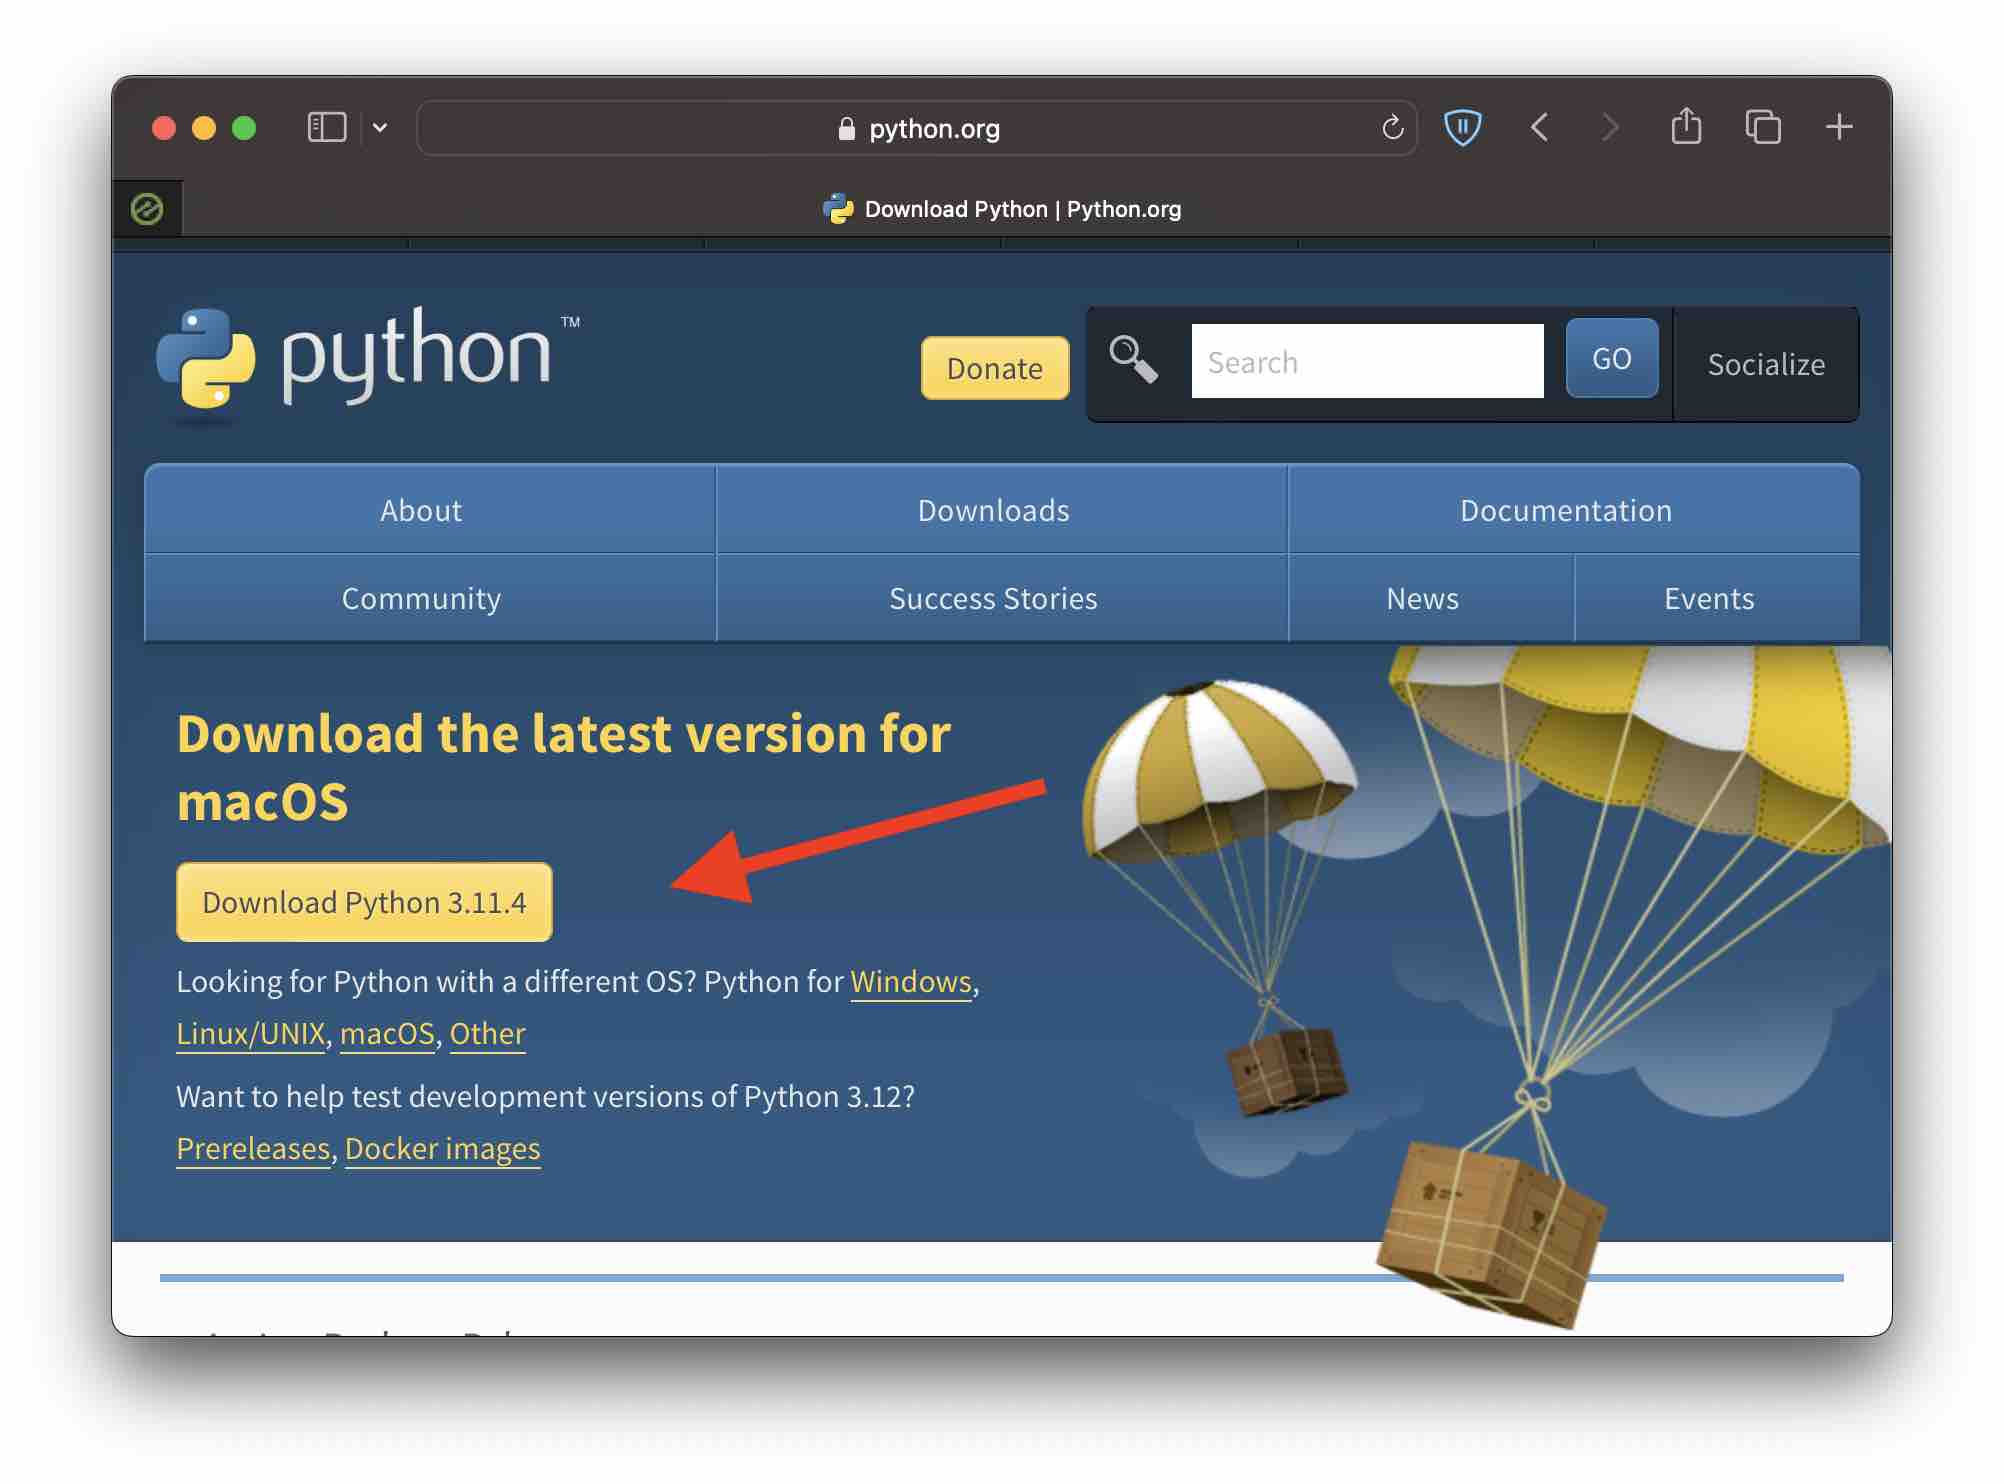 Download the latest version for Python on macOS